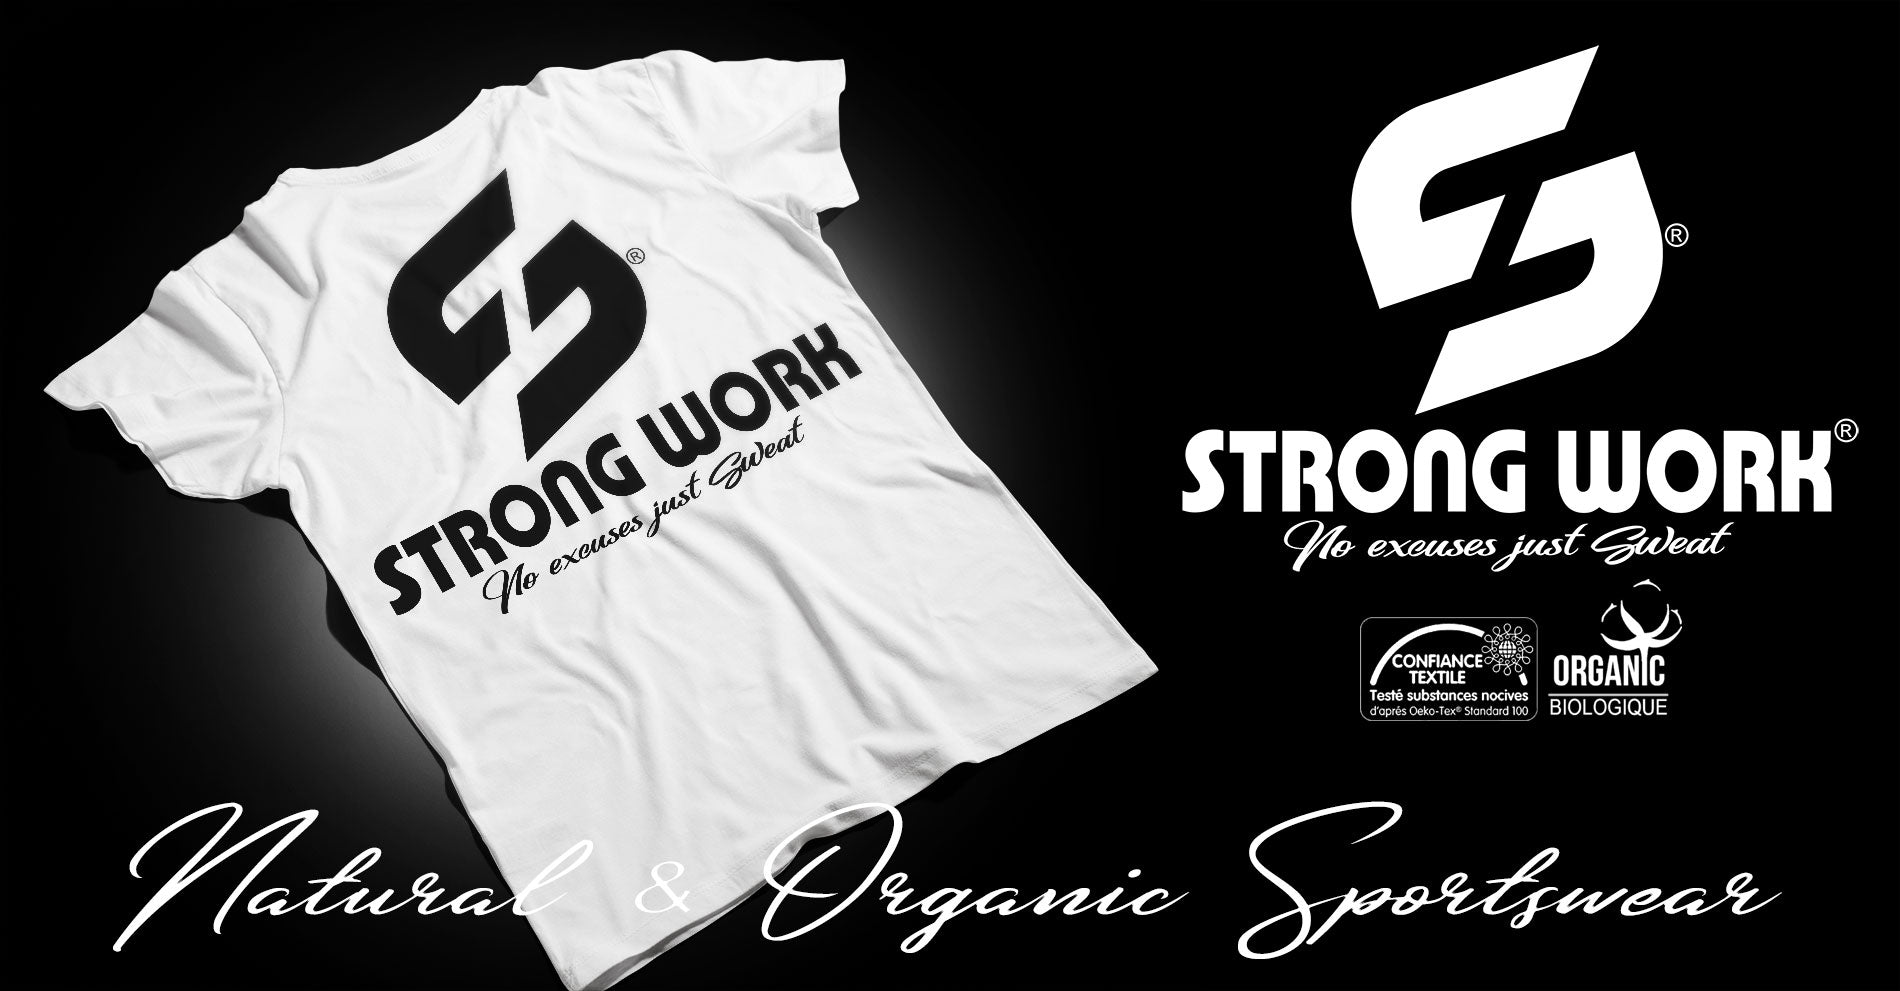 NEW STRONG WORK T-SHIRT FOR MEN AND WOMEN